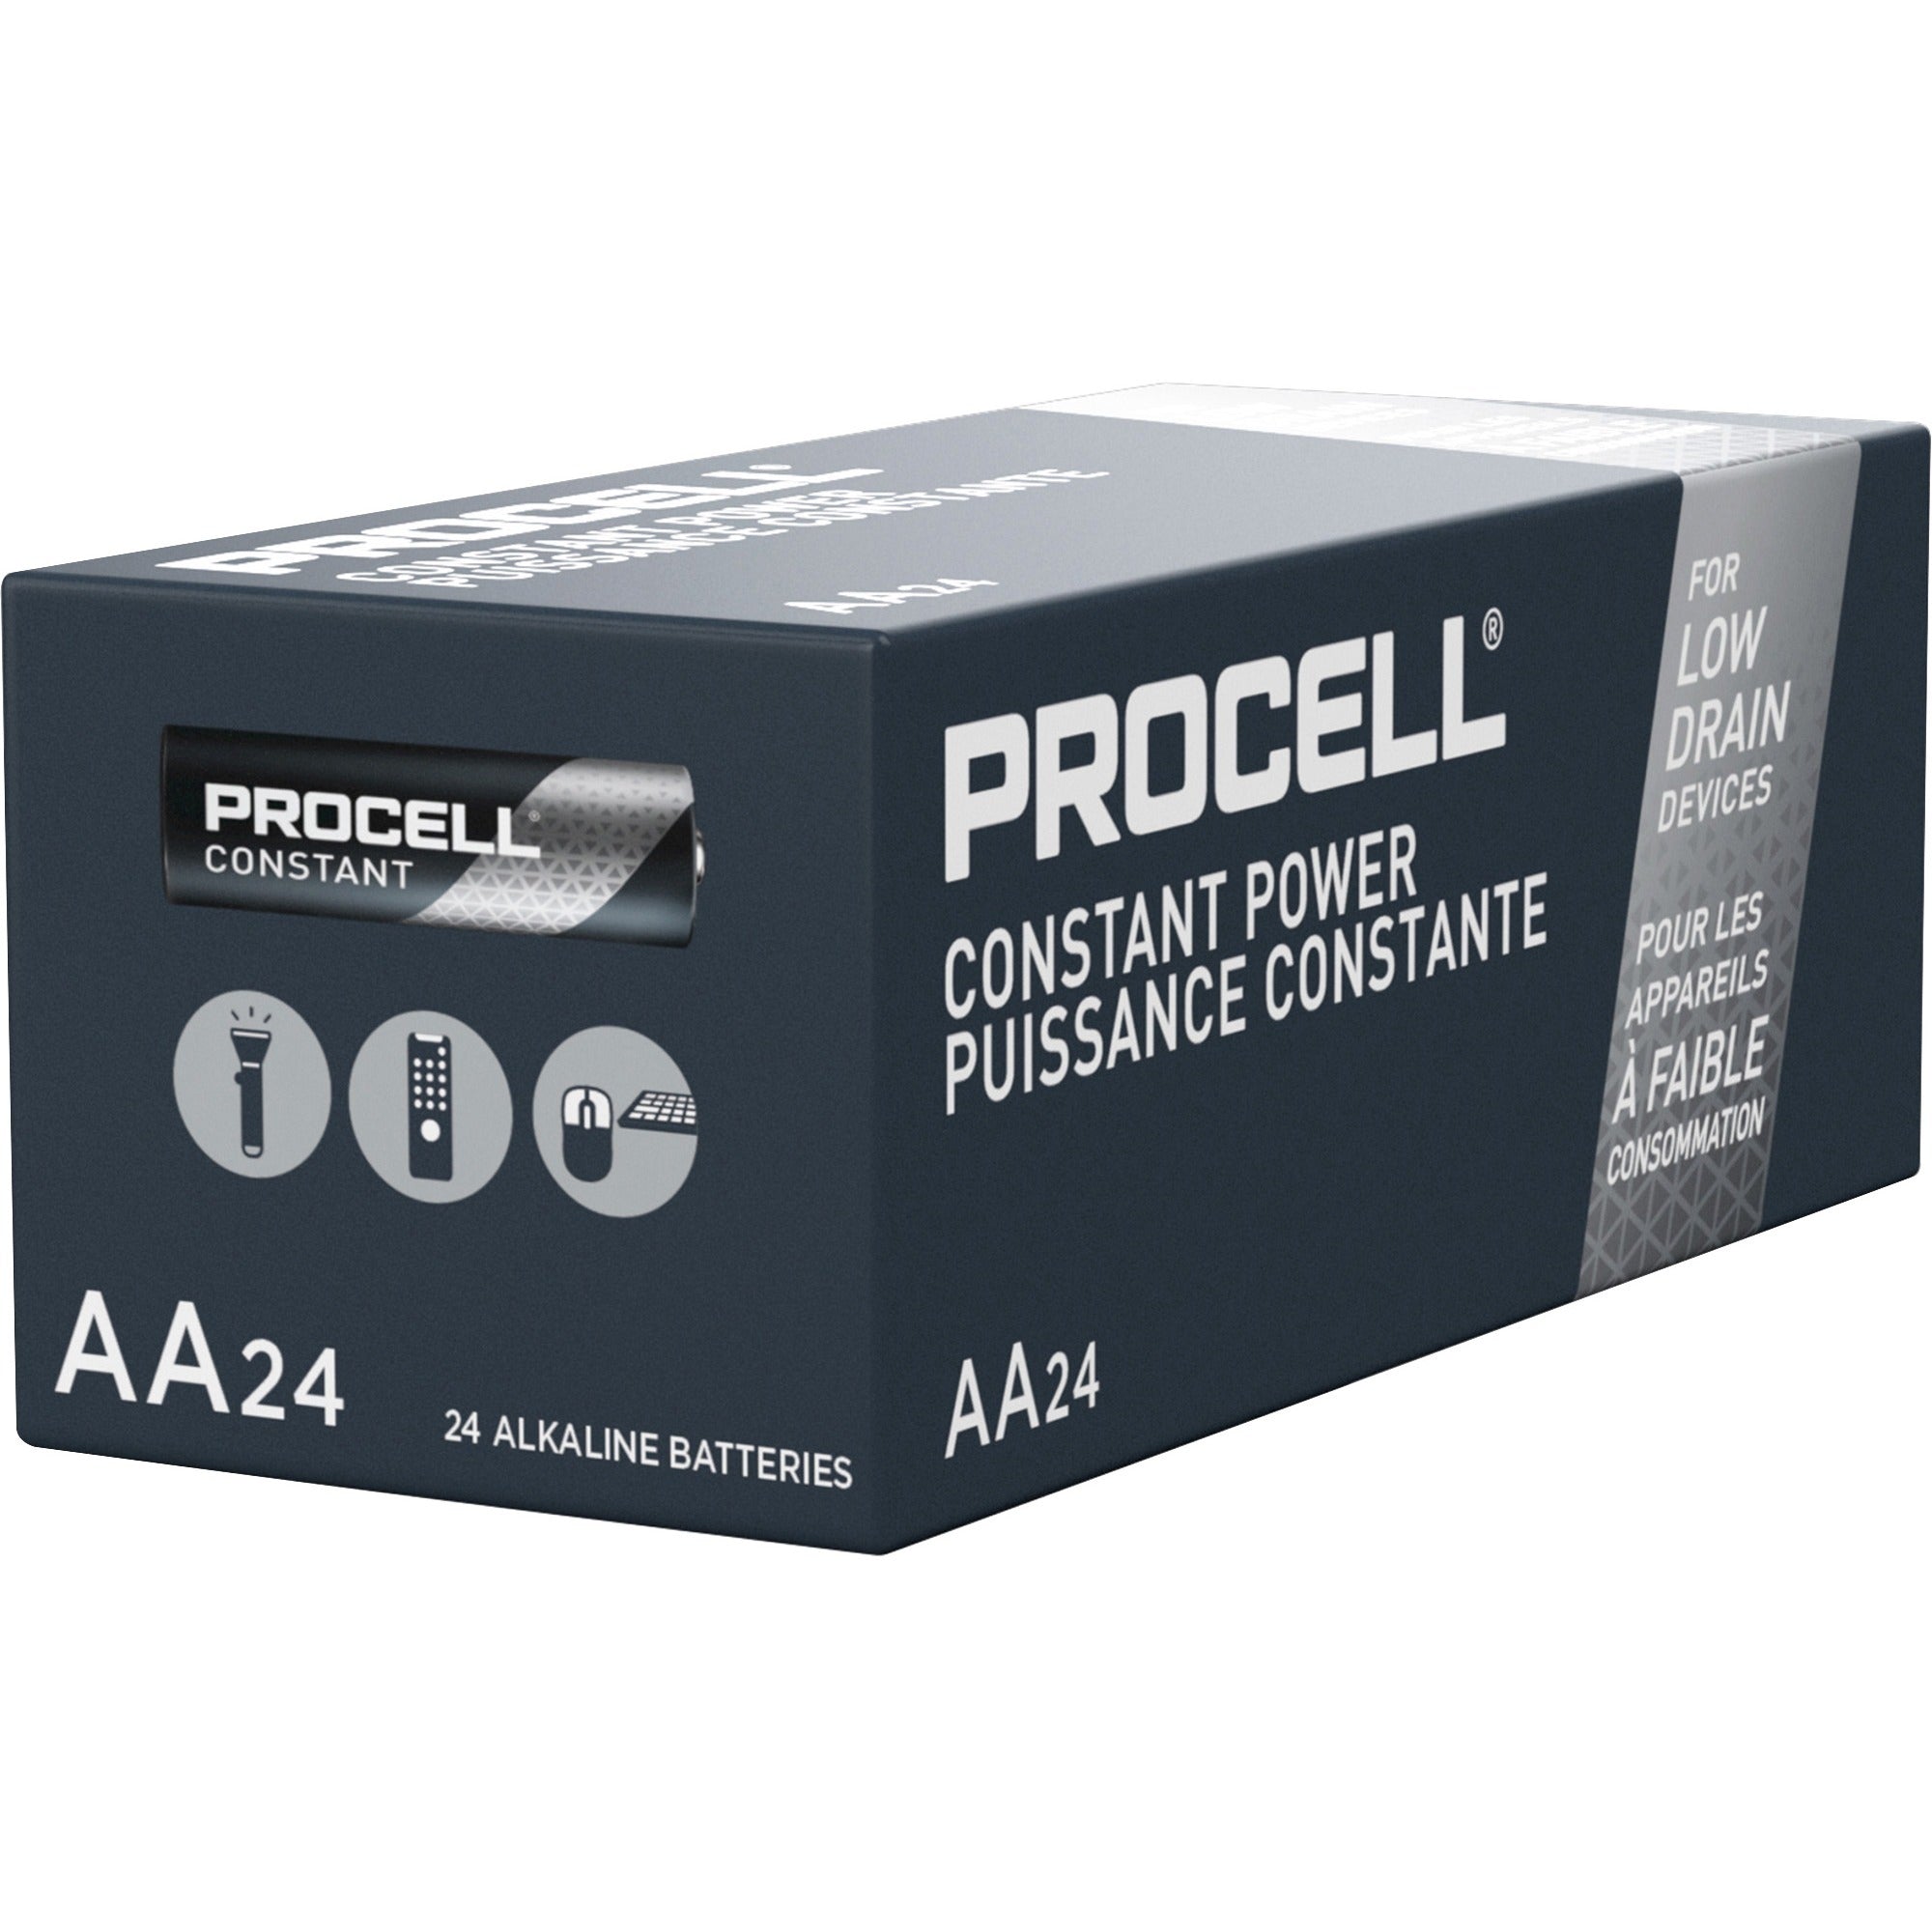 duracell-procell-alkaline-aa-battery-boxes-of-24-for-multipurpose-aa-2100-mah-15-v-dc-144-carton_durpc1500bkdct - 2